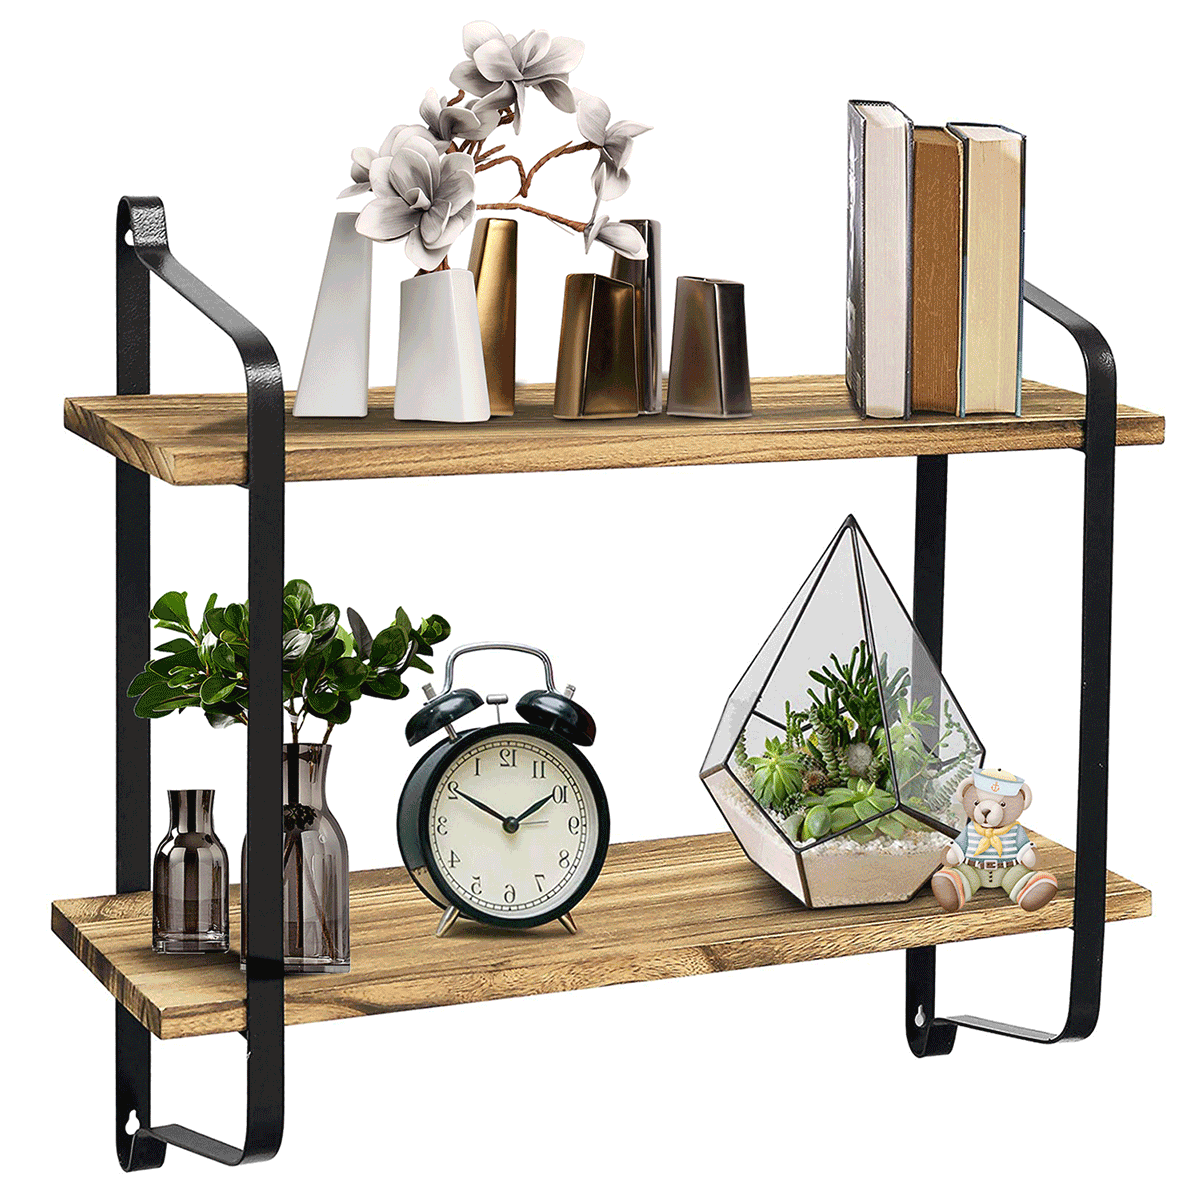 Hanging Metal Wooden Shelves 2-Tier Black Multifunctional Decorative Storage Shelf for Bars/Restaurants/Kitchens Easy to Install Size : 603050cm Rustic Style Iron Ceiling Shelf 